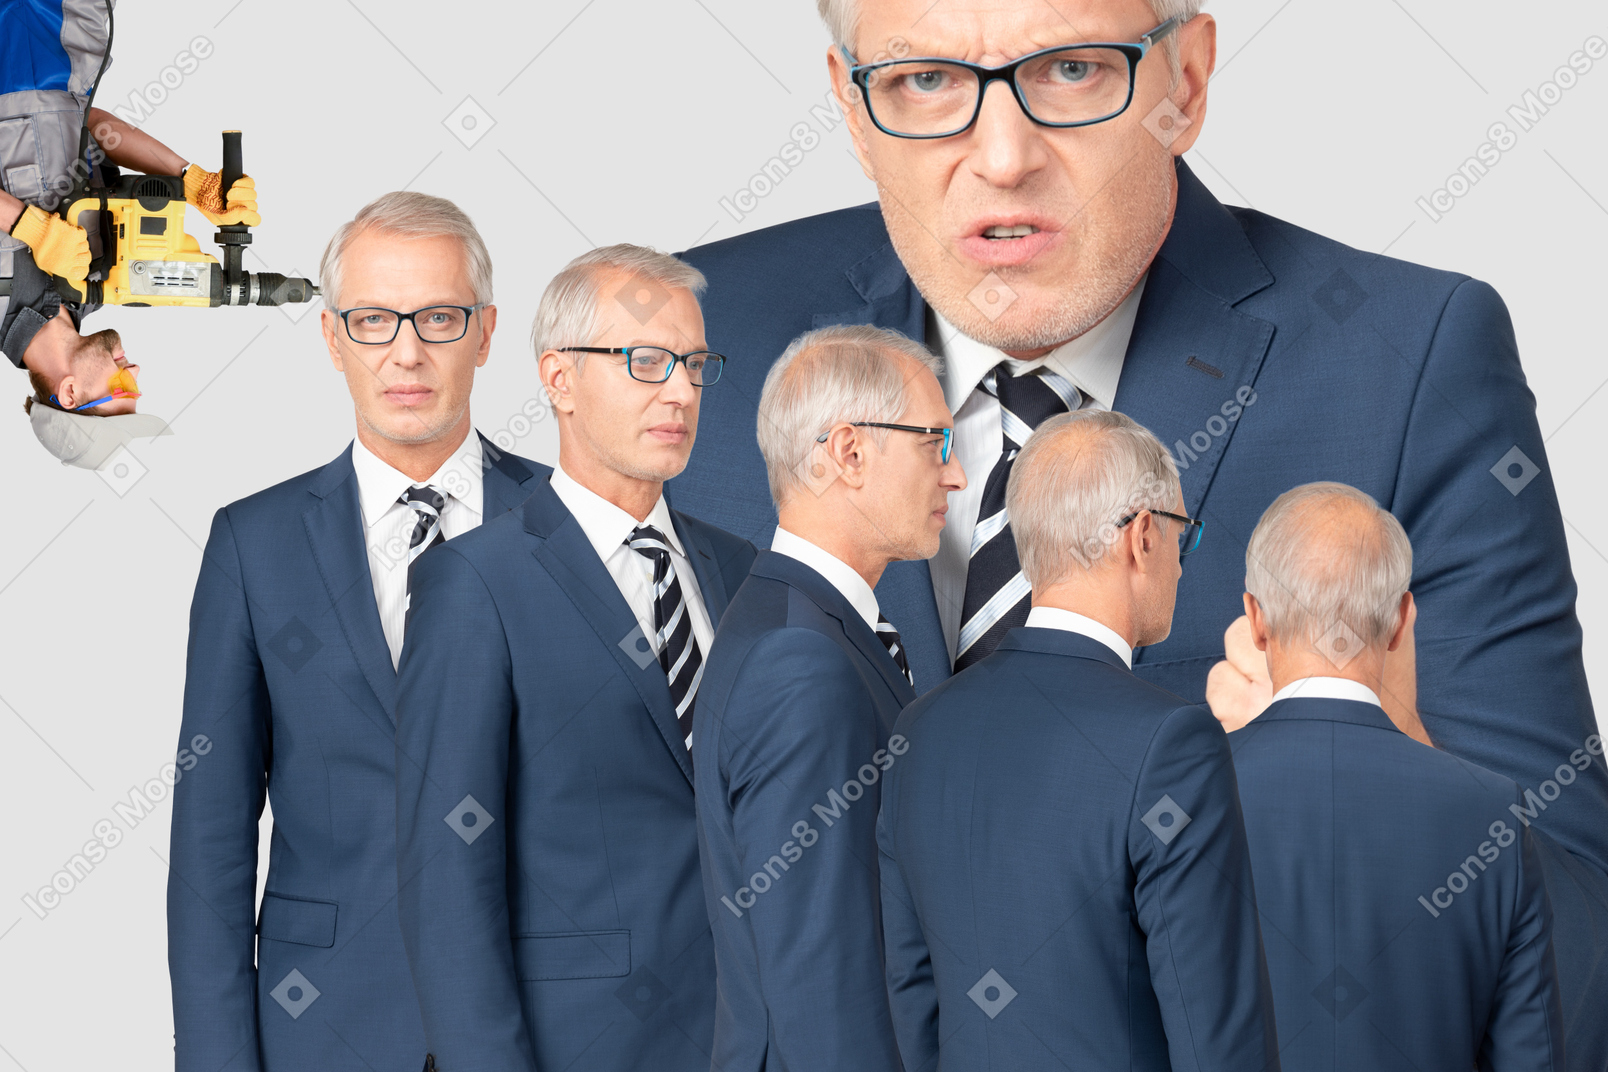 Different angles of the same man in suit